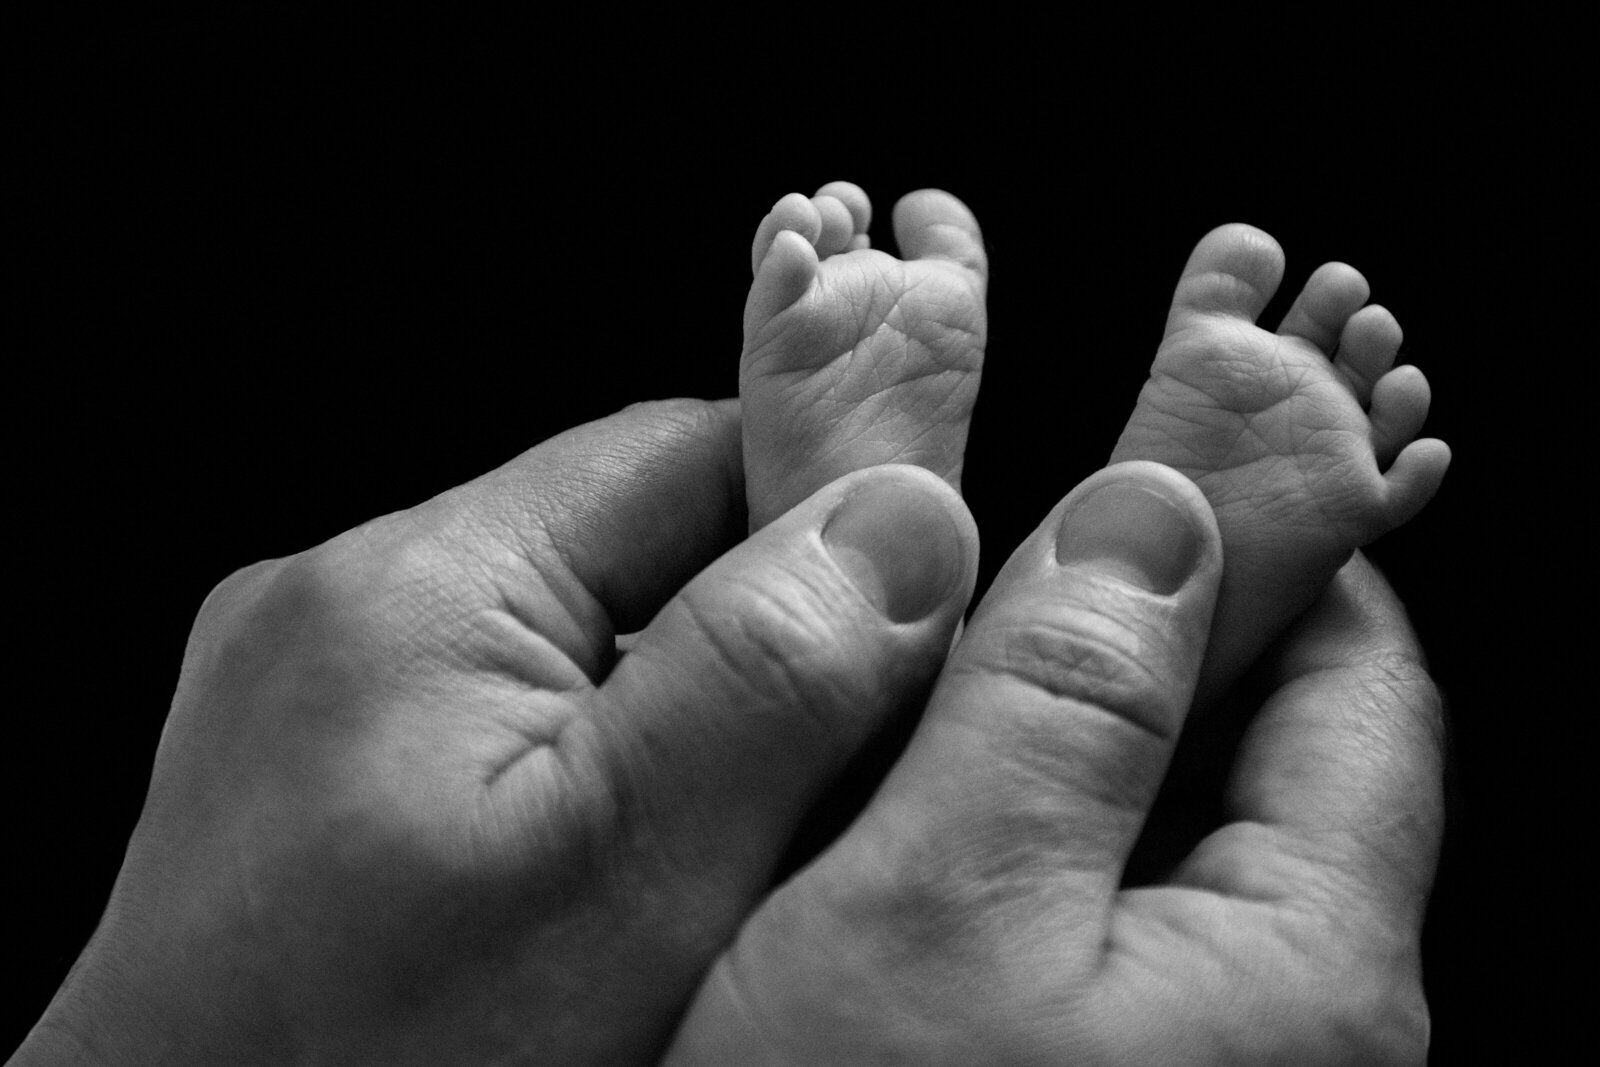 Baby Feet in her Father's hands